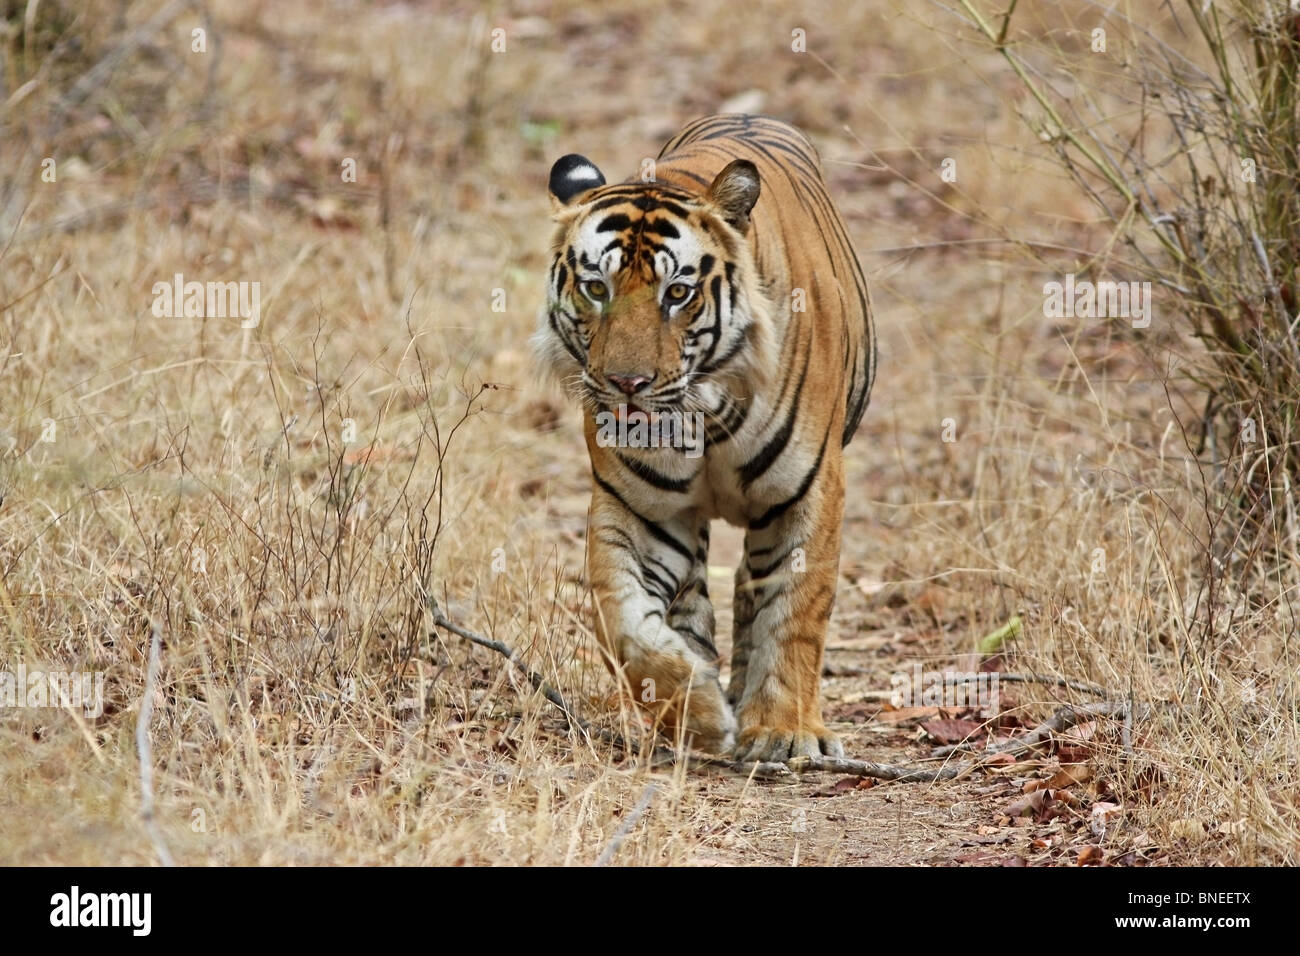 A huge male tiger coming head on towards the camera in the jungles of Bandhavgarh National Park, India Stock Photo